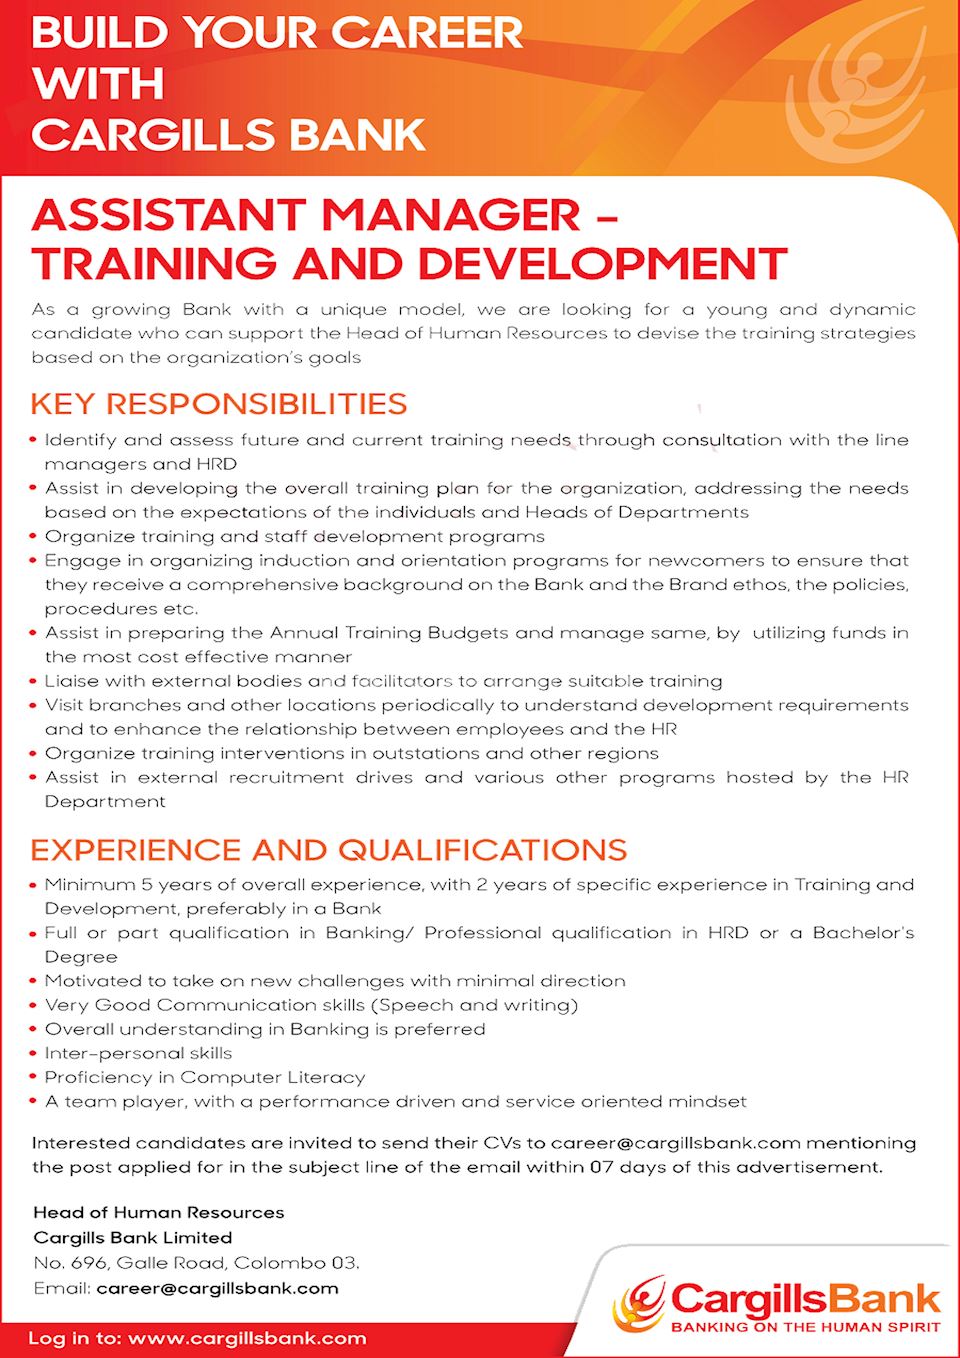 Assistant Manager   Training and Development at Cargills Bank